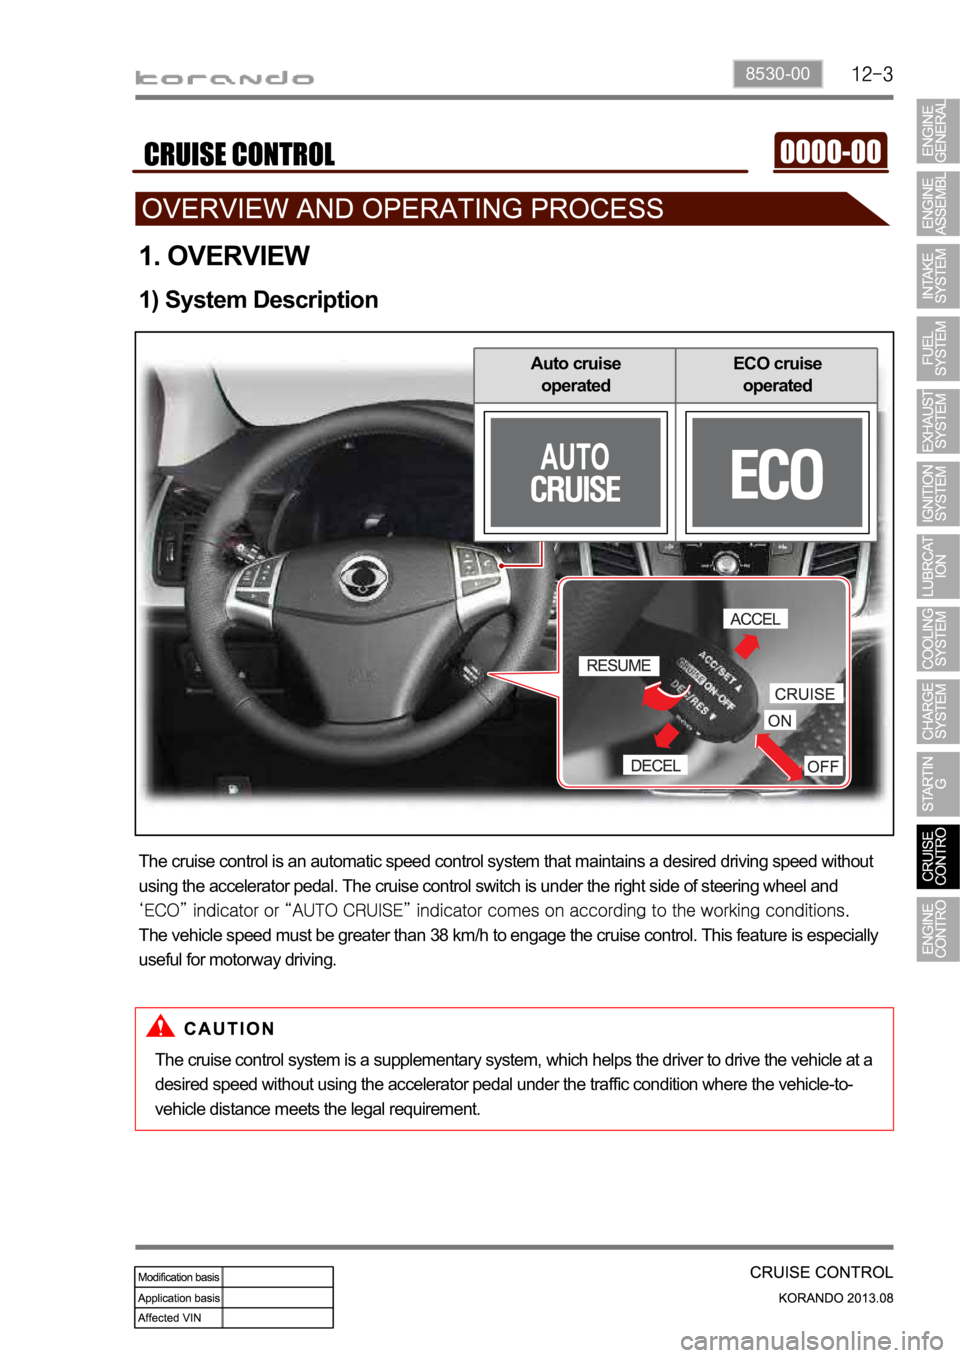 SSANGYONG KORANDO 2013  Service Manual 8530-00
1. OVERVIEW
1) System Description
The cruise control is an automatic speed control system that maintains a desired driving speed without 
using the accelerator pedal. The cruise control switch